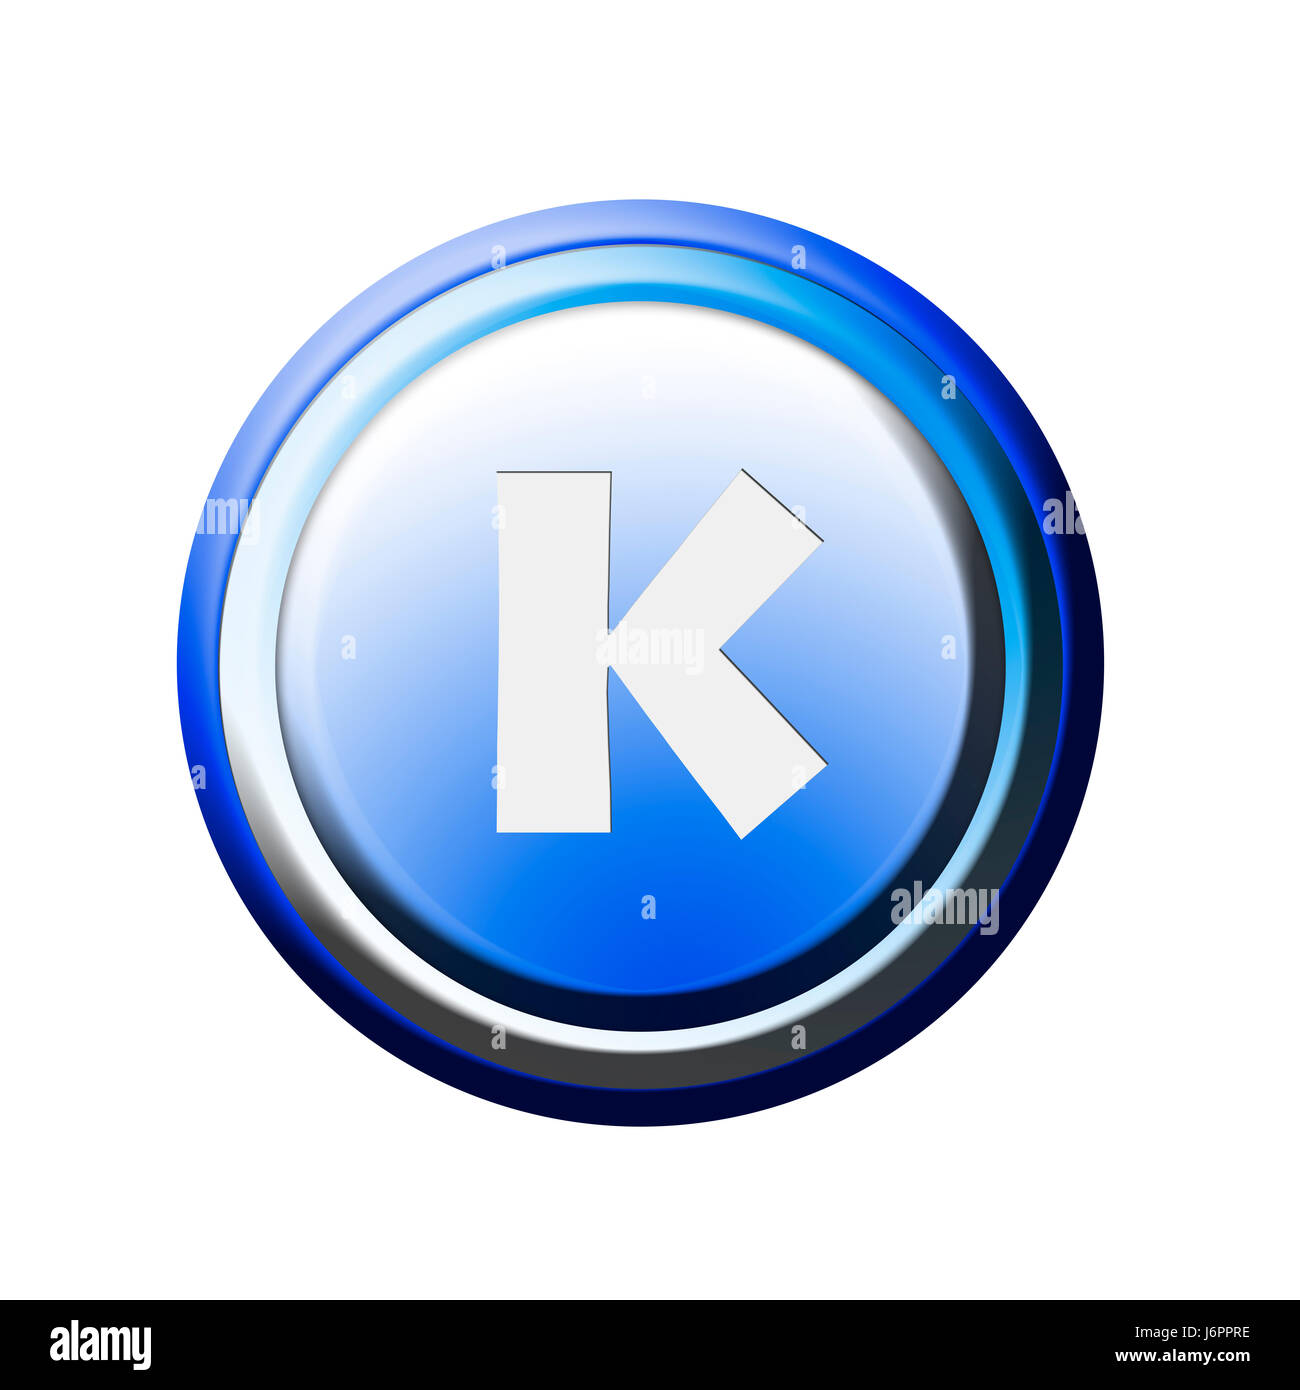 button with letter k Stock Photo